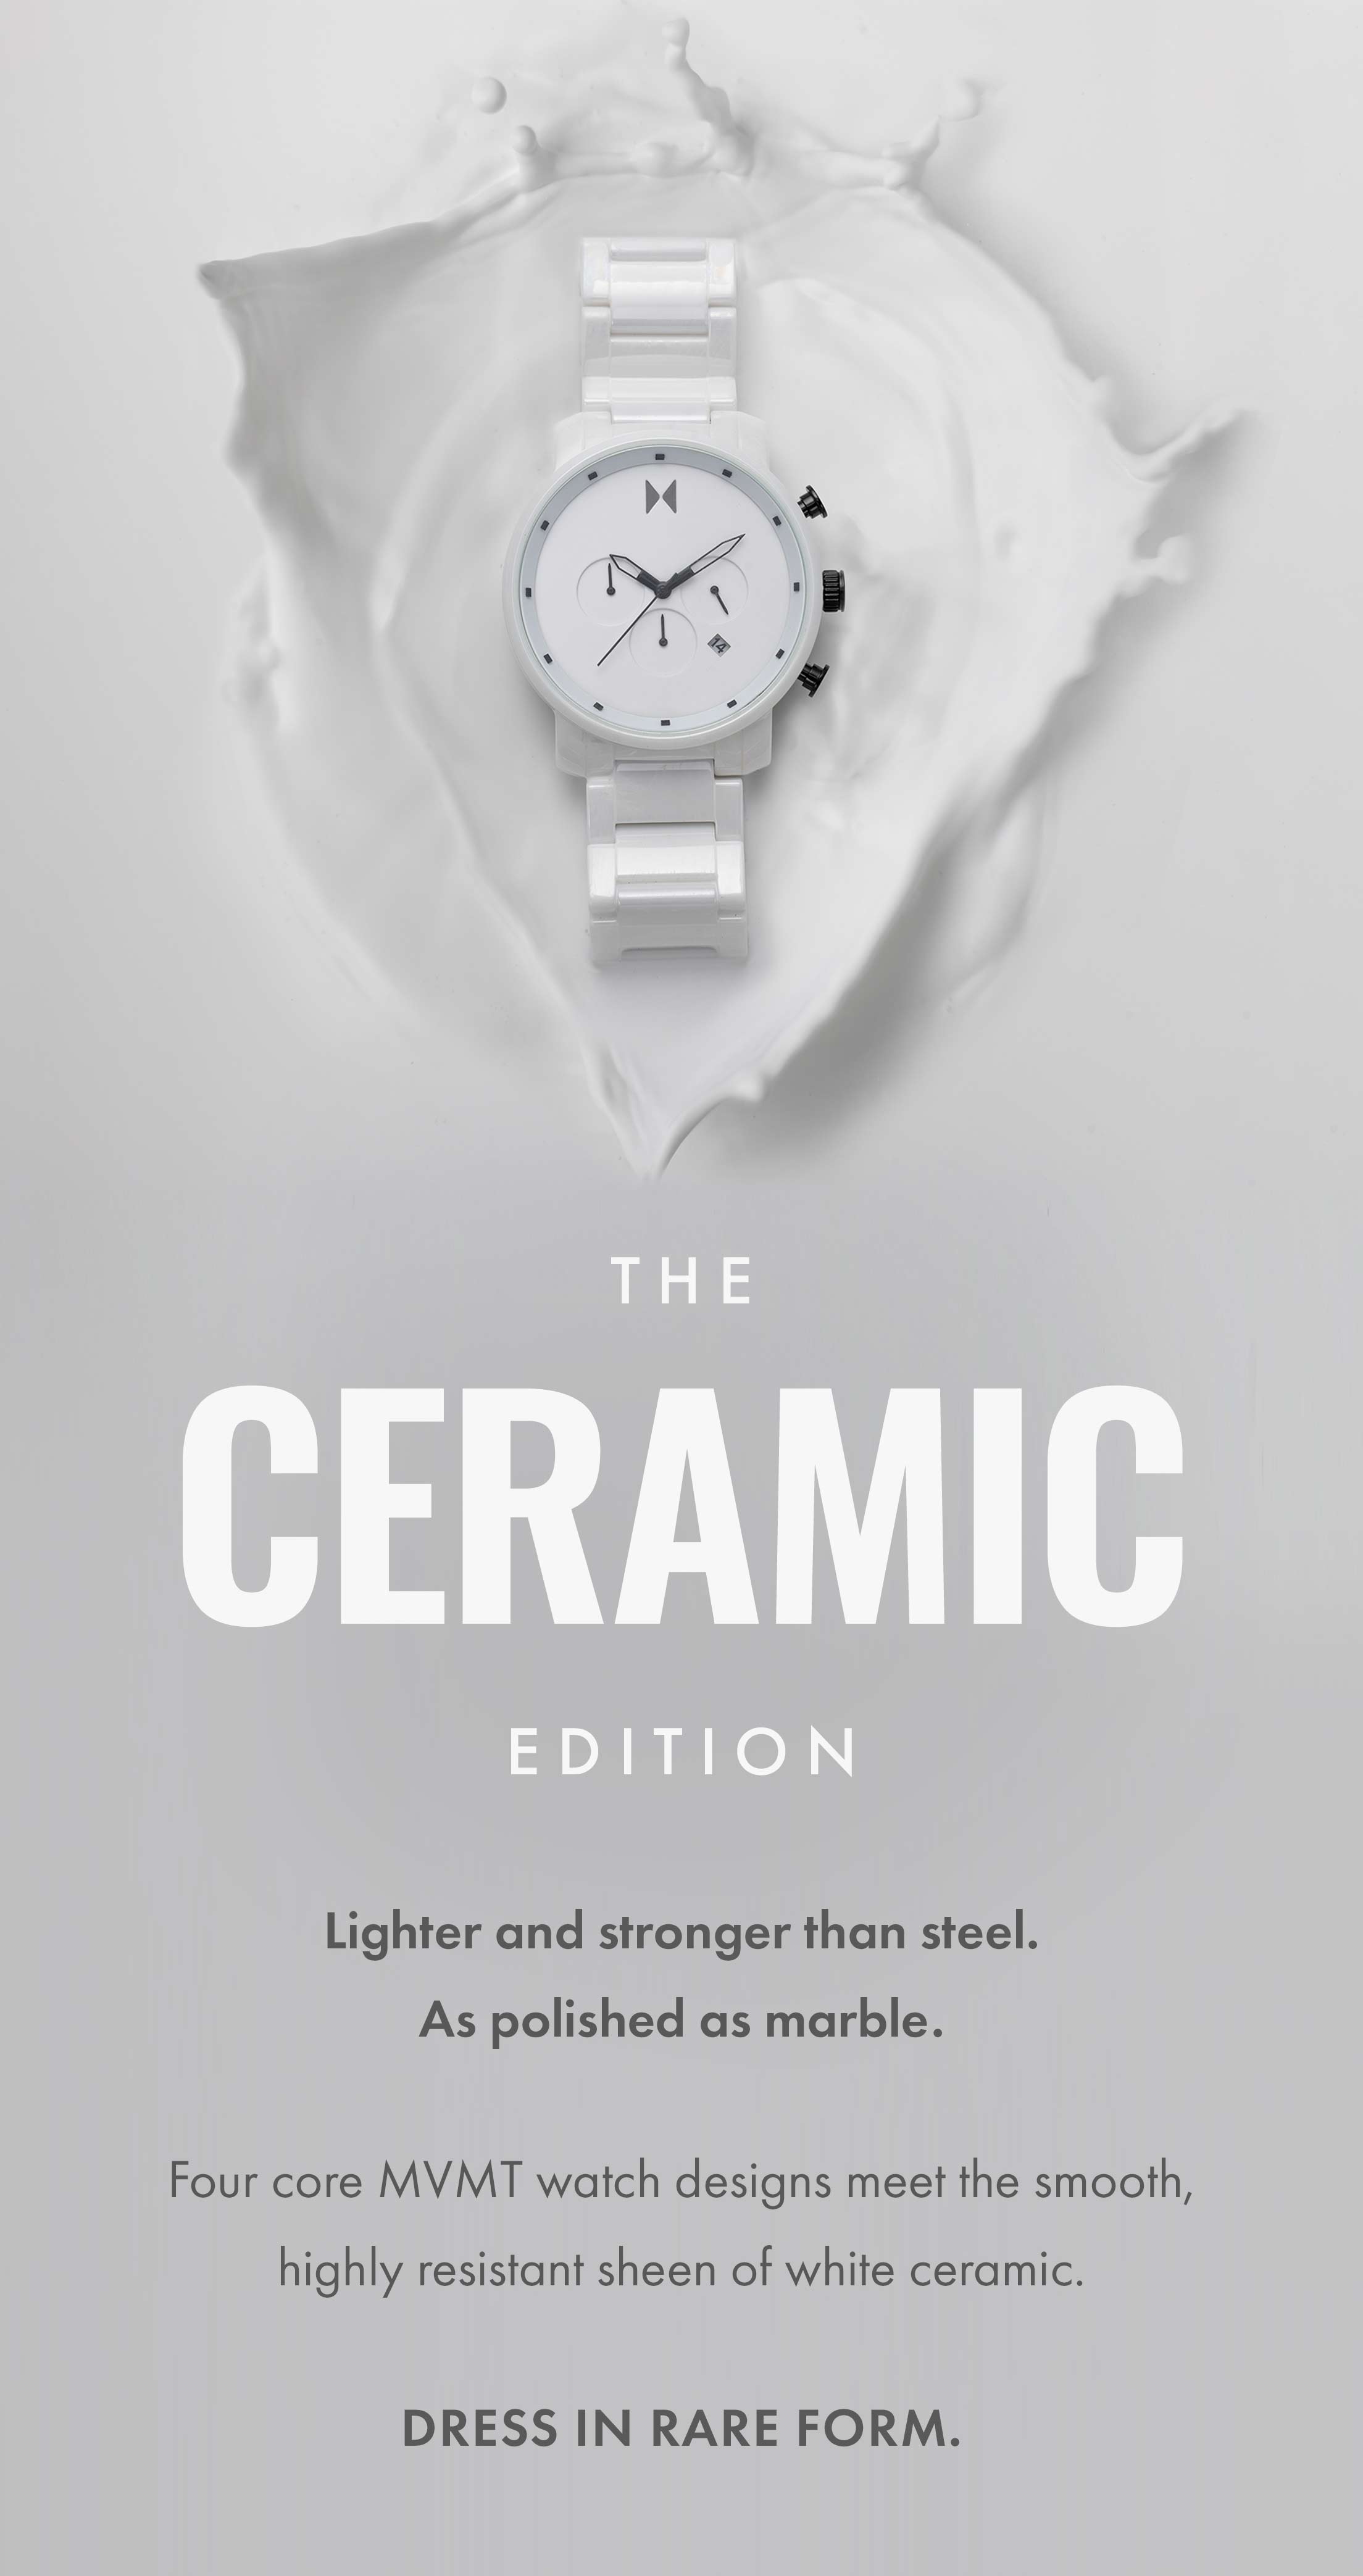 The Ceramic Edition: Lighter and strong than steel. As polished as marble. Four core MVMT watch designs meet the smooth, highly resistant sheen of white ceramic. Dress in rare form.